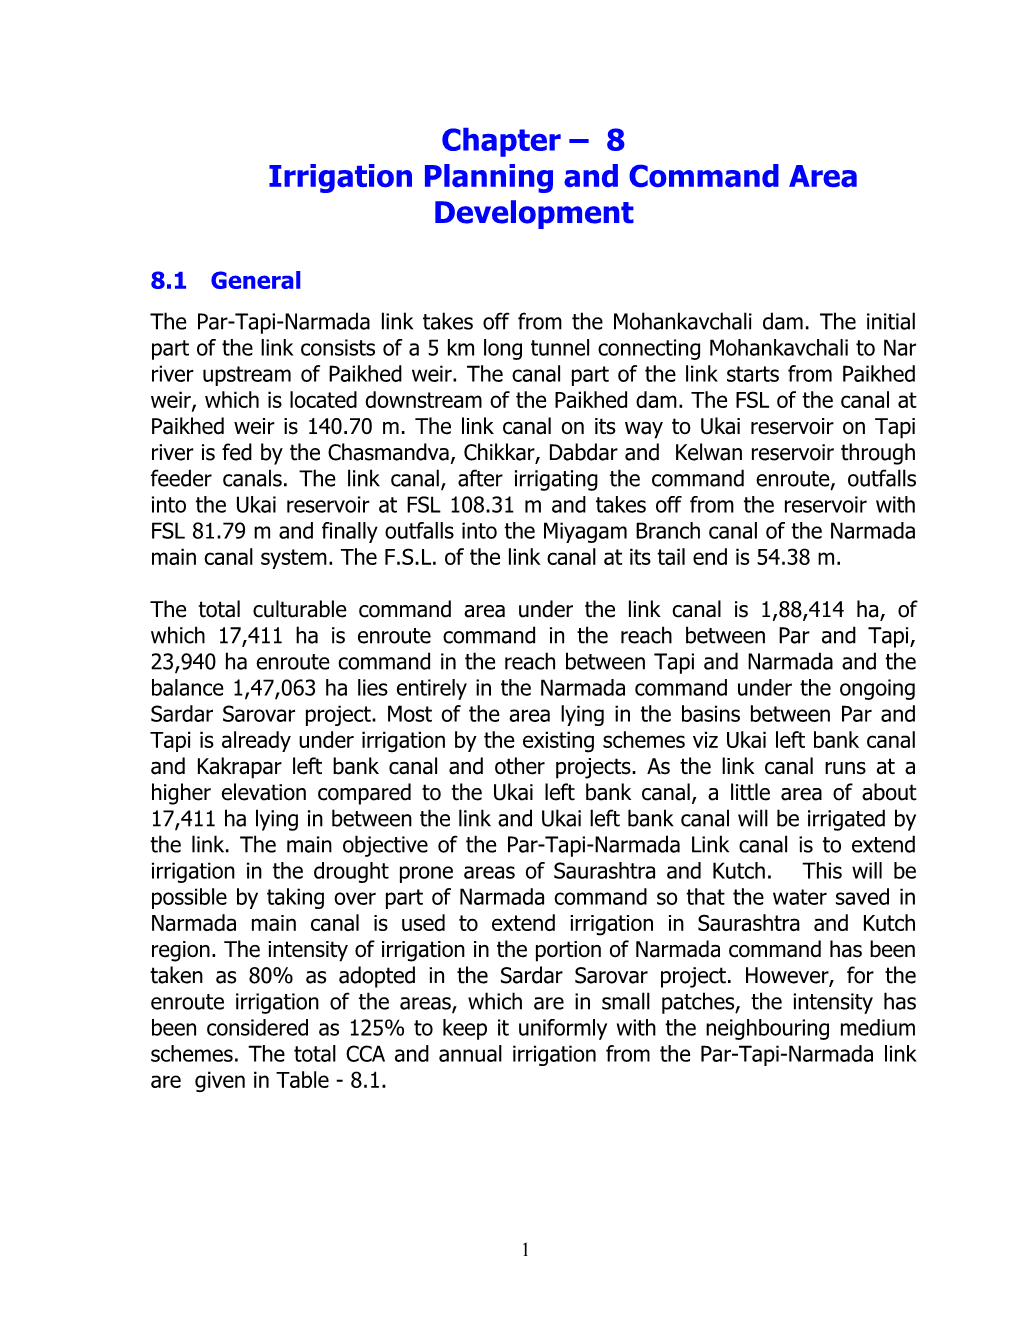 Chapter – 8 Irrigation Planning and Command Area Development